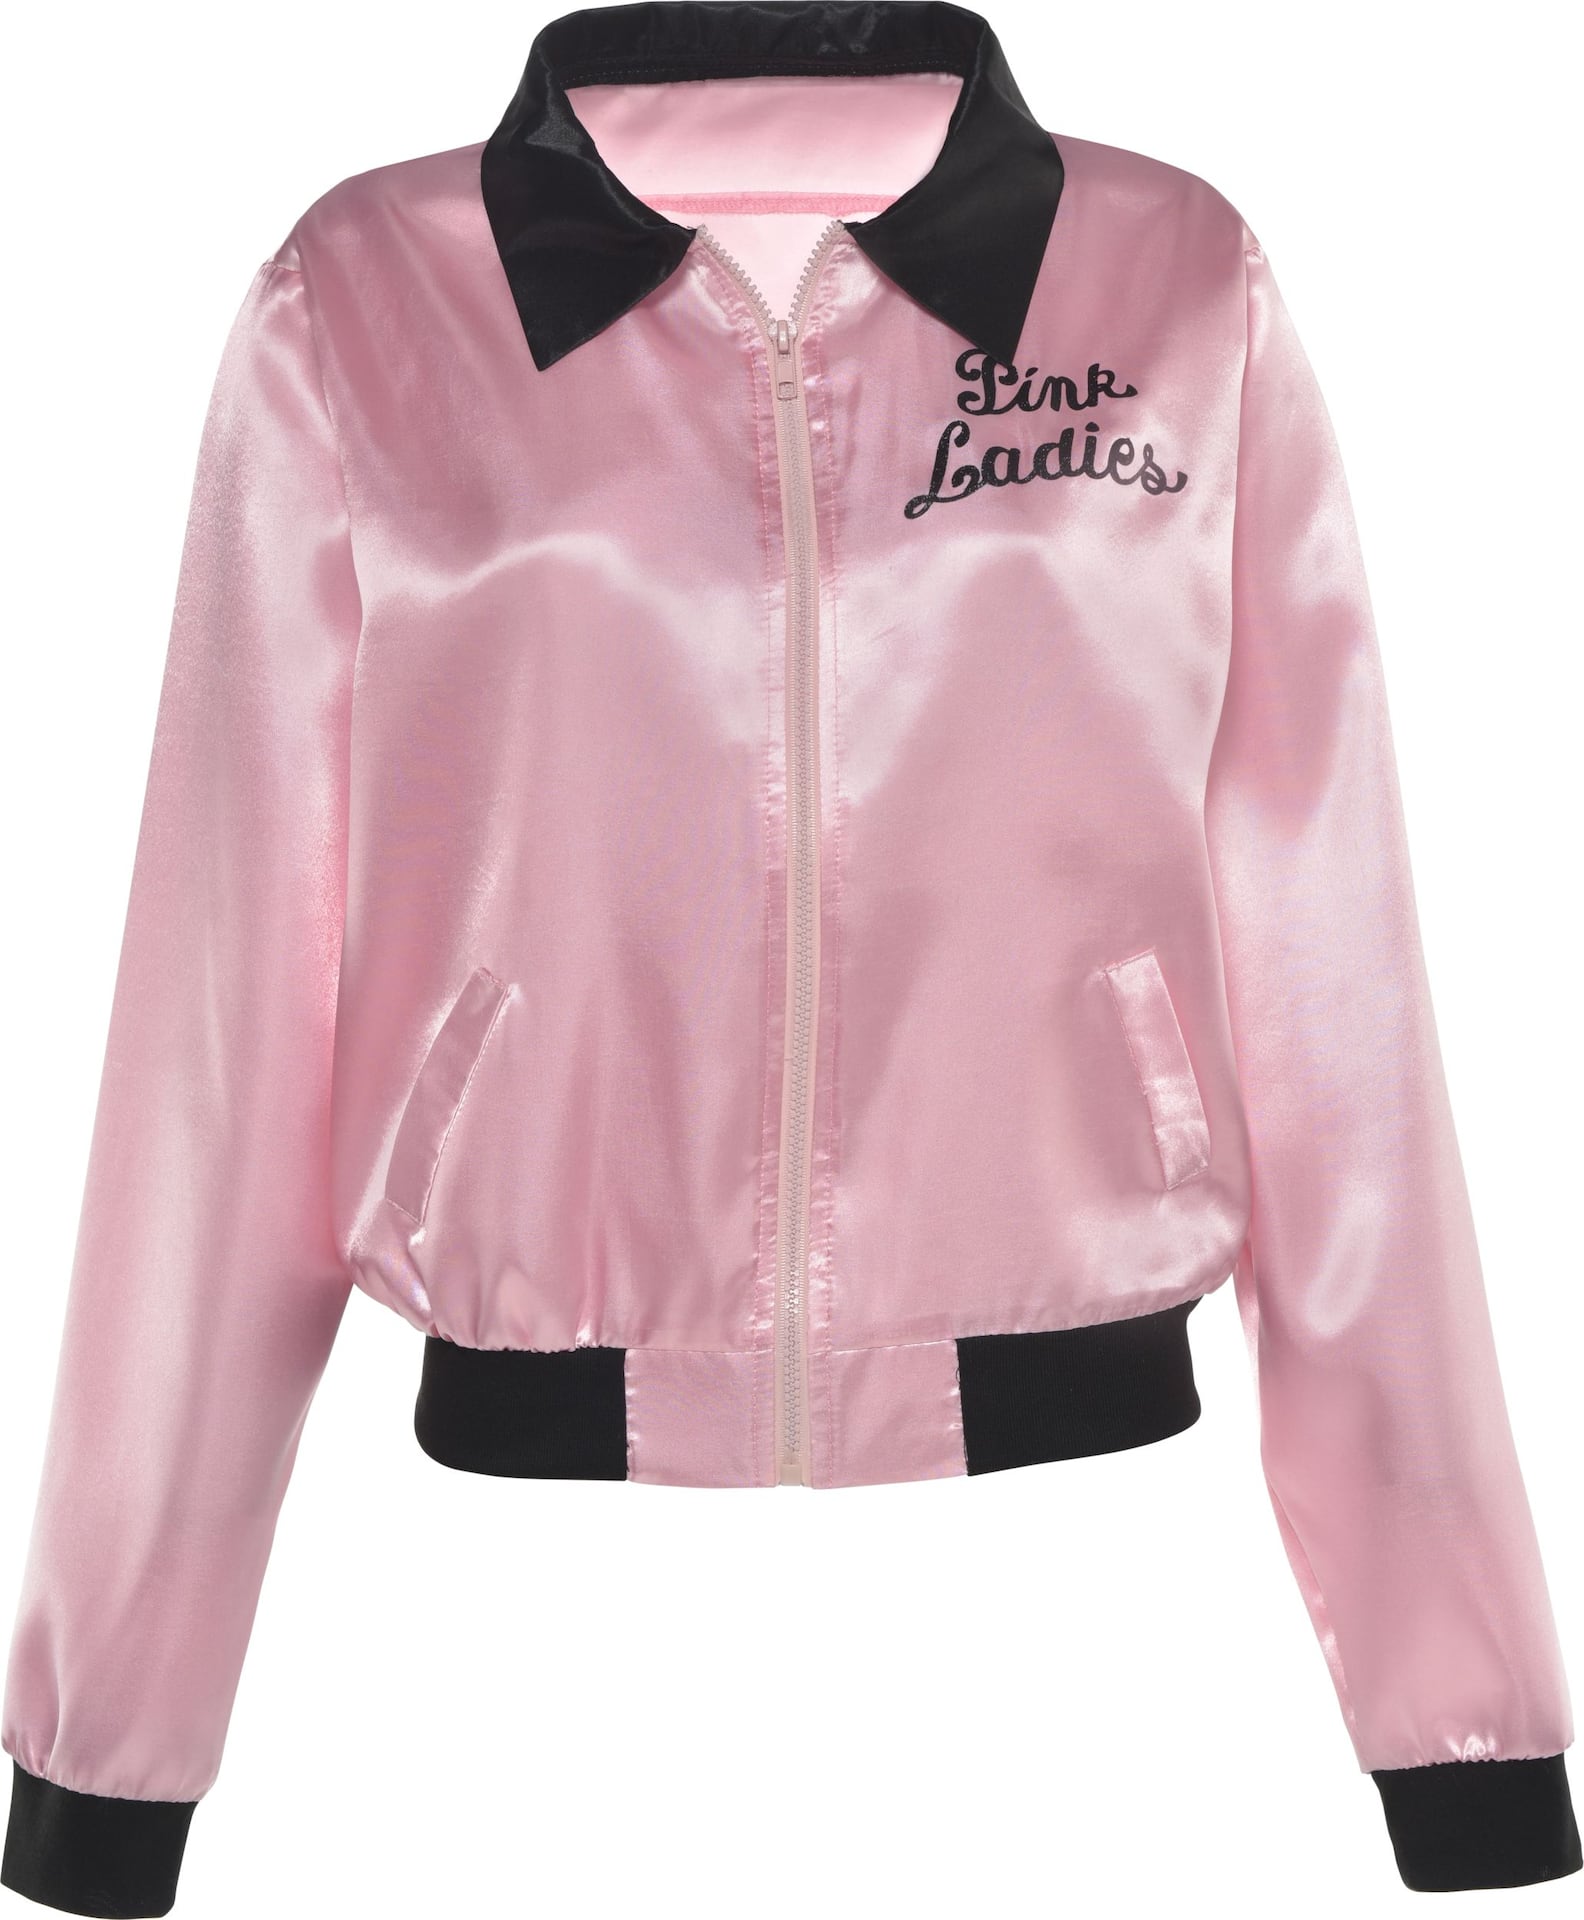 Adult Grease Pink Ladies Jacket, Pink/Black, One Size, Wearable Costume  Accessory for Halloween